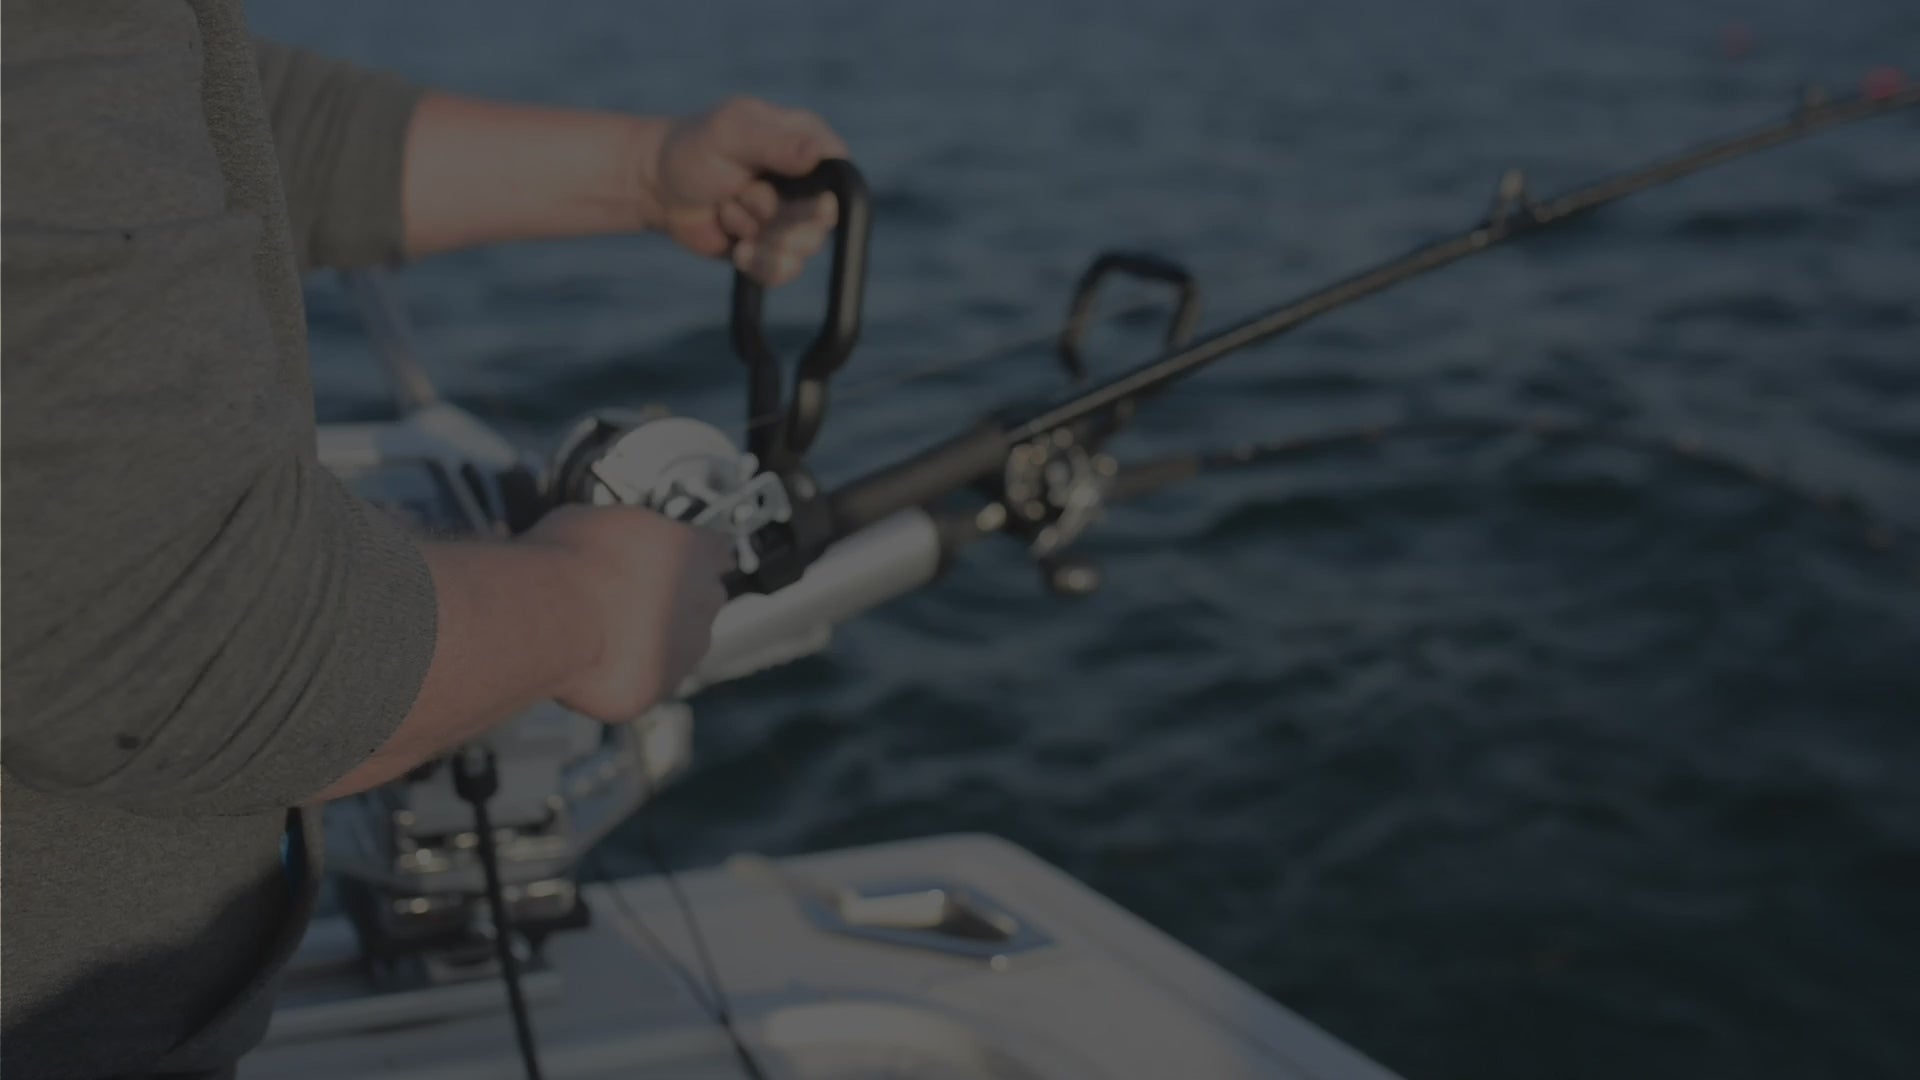 Load video: The Rod Boss fishing arm